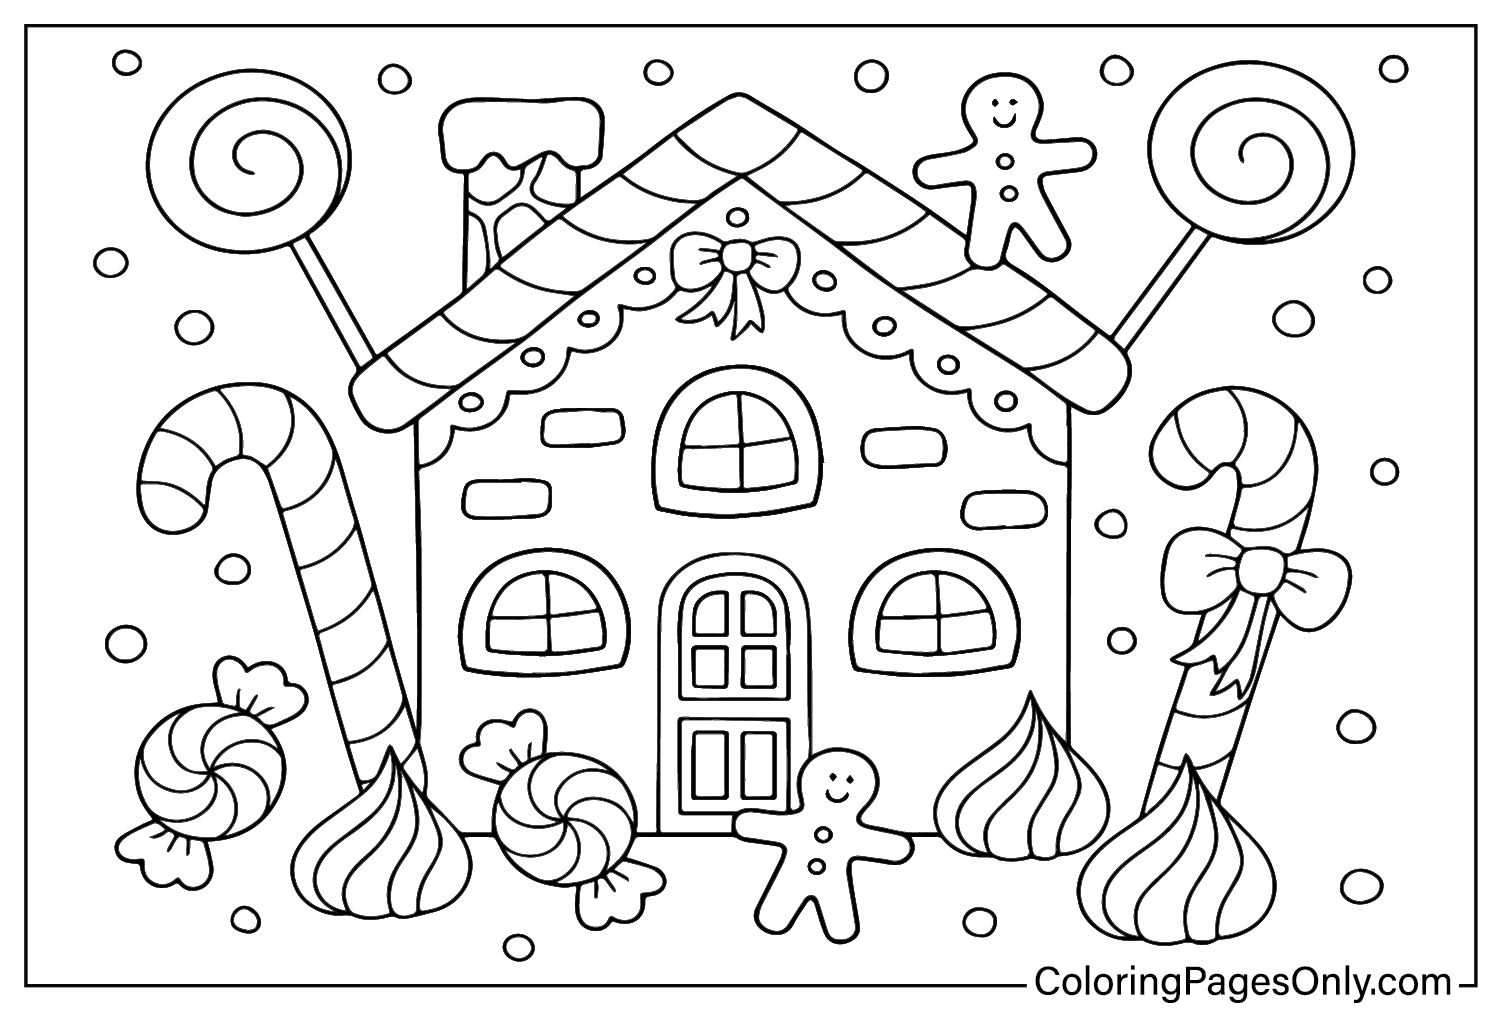 Gingerbread House Coloring Sheet from Gingerbread House